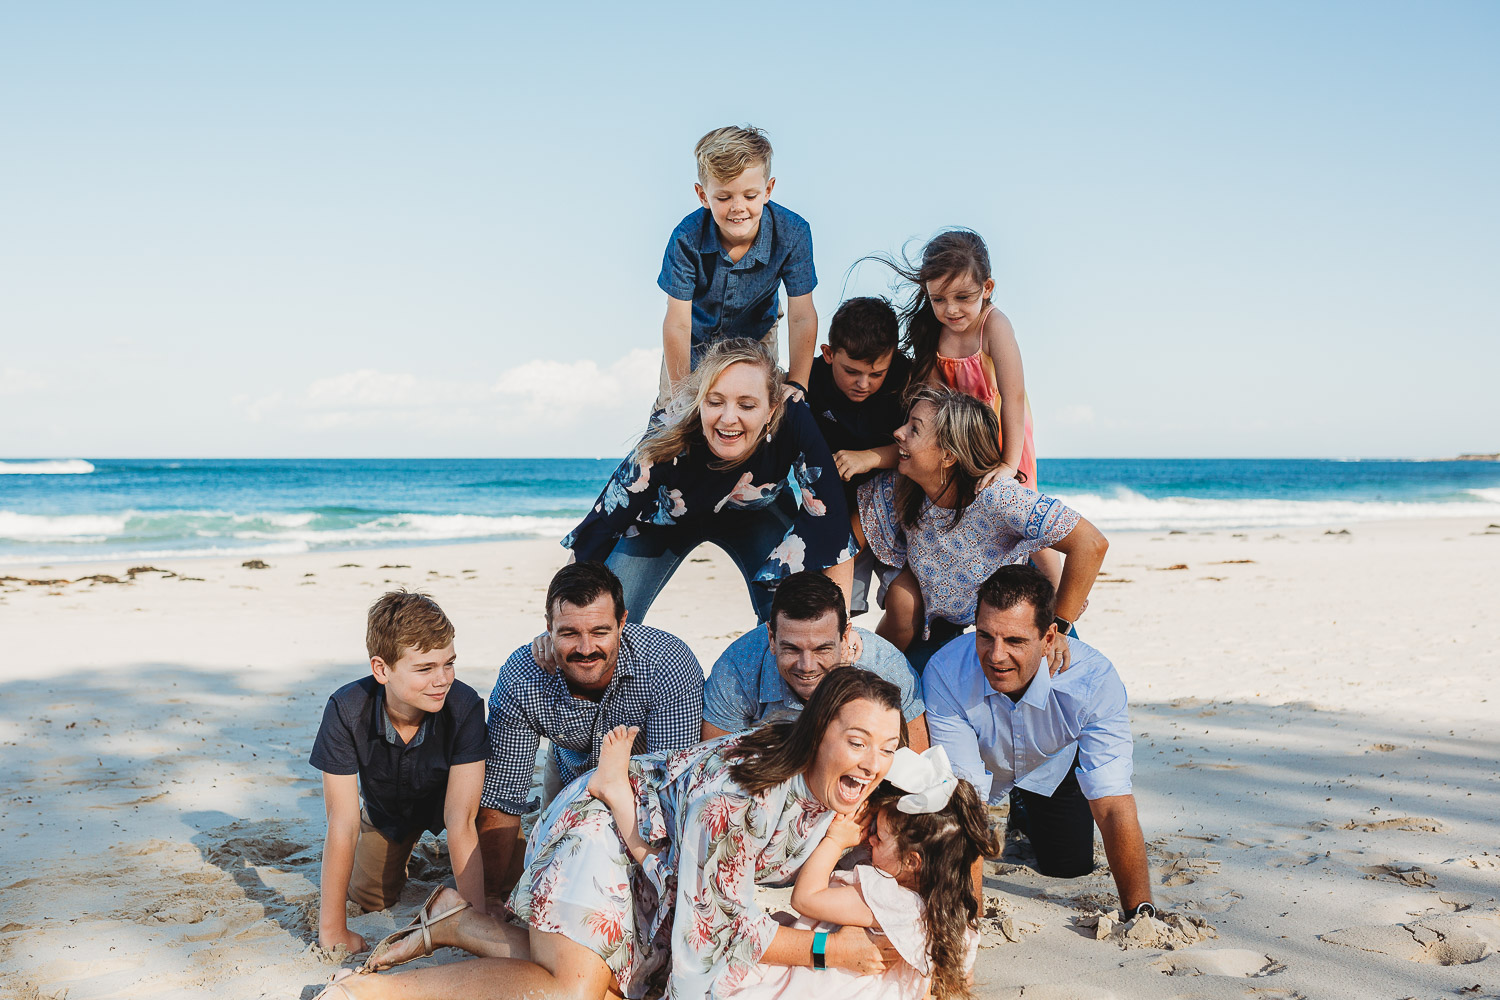 Family builds human pyramid while laughing and smiling